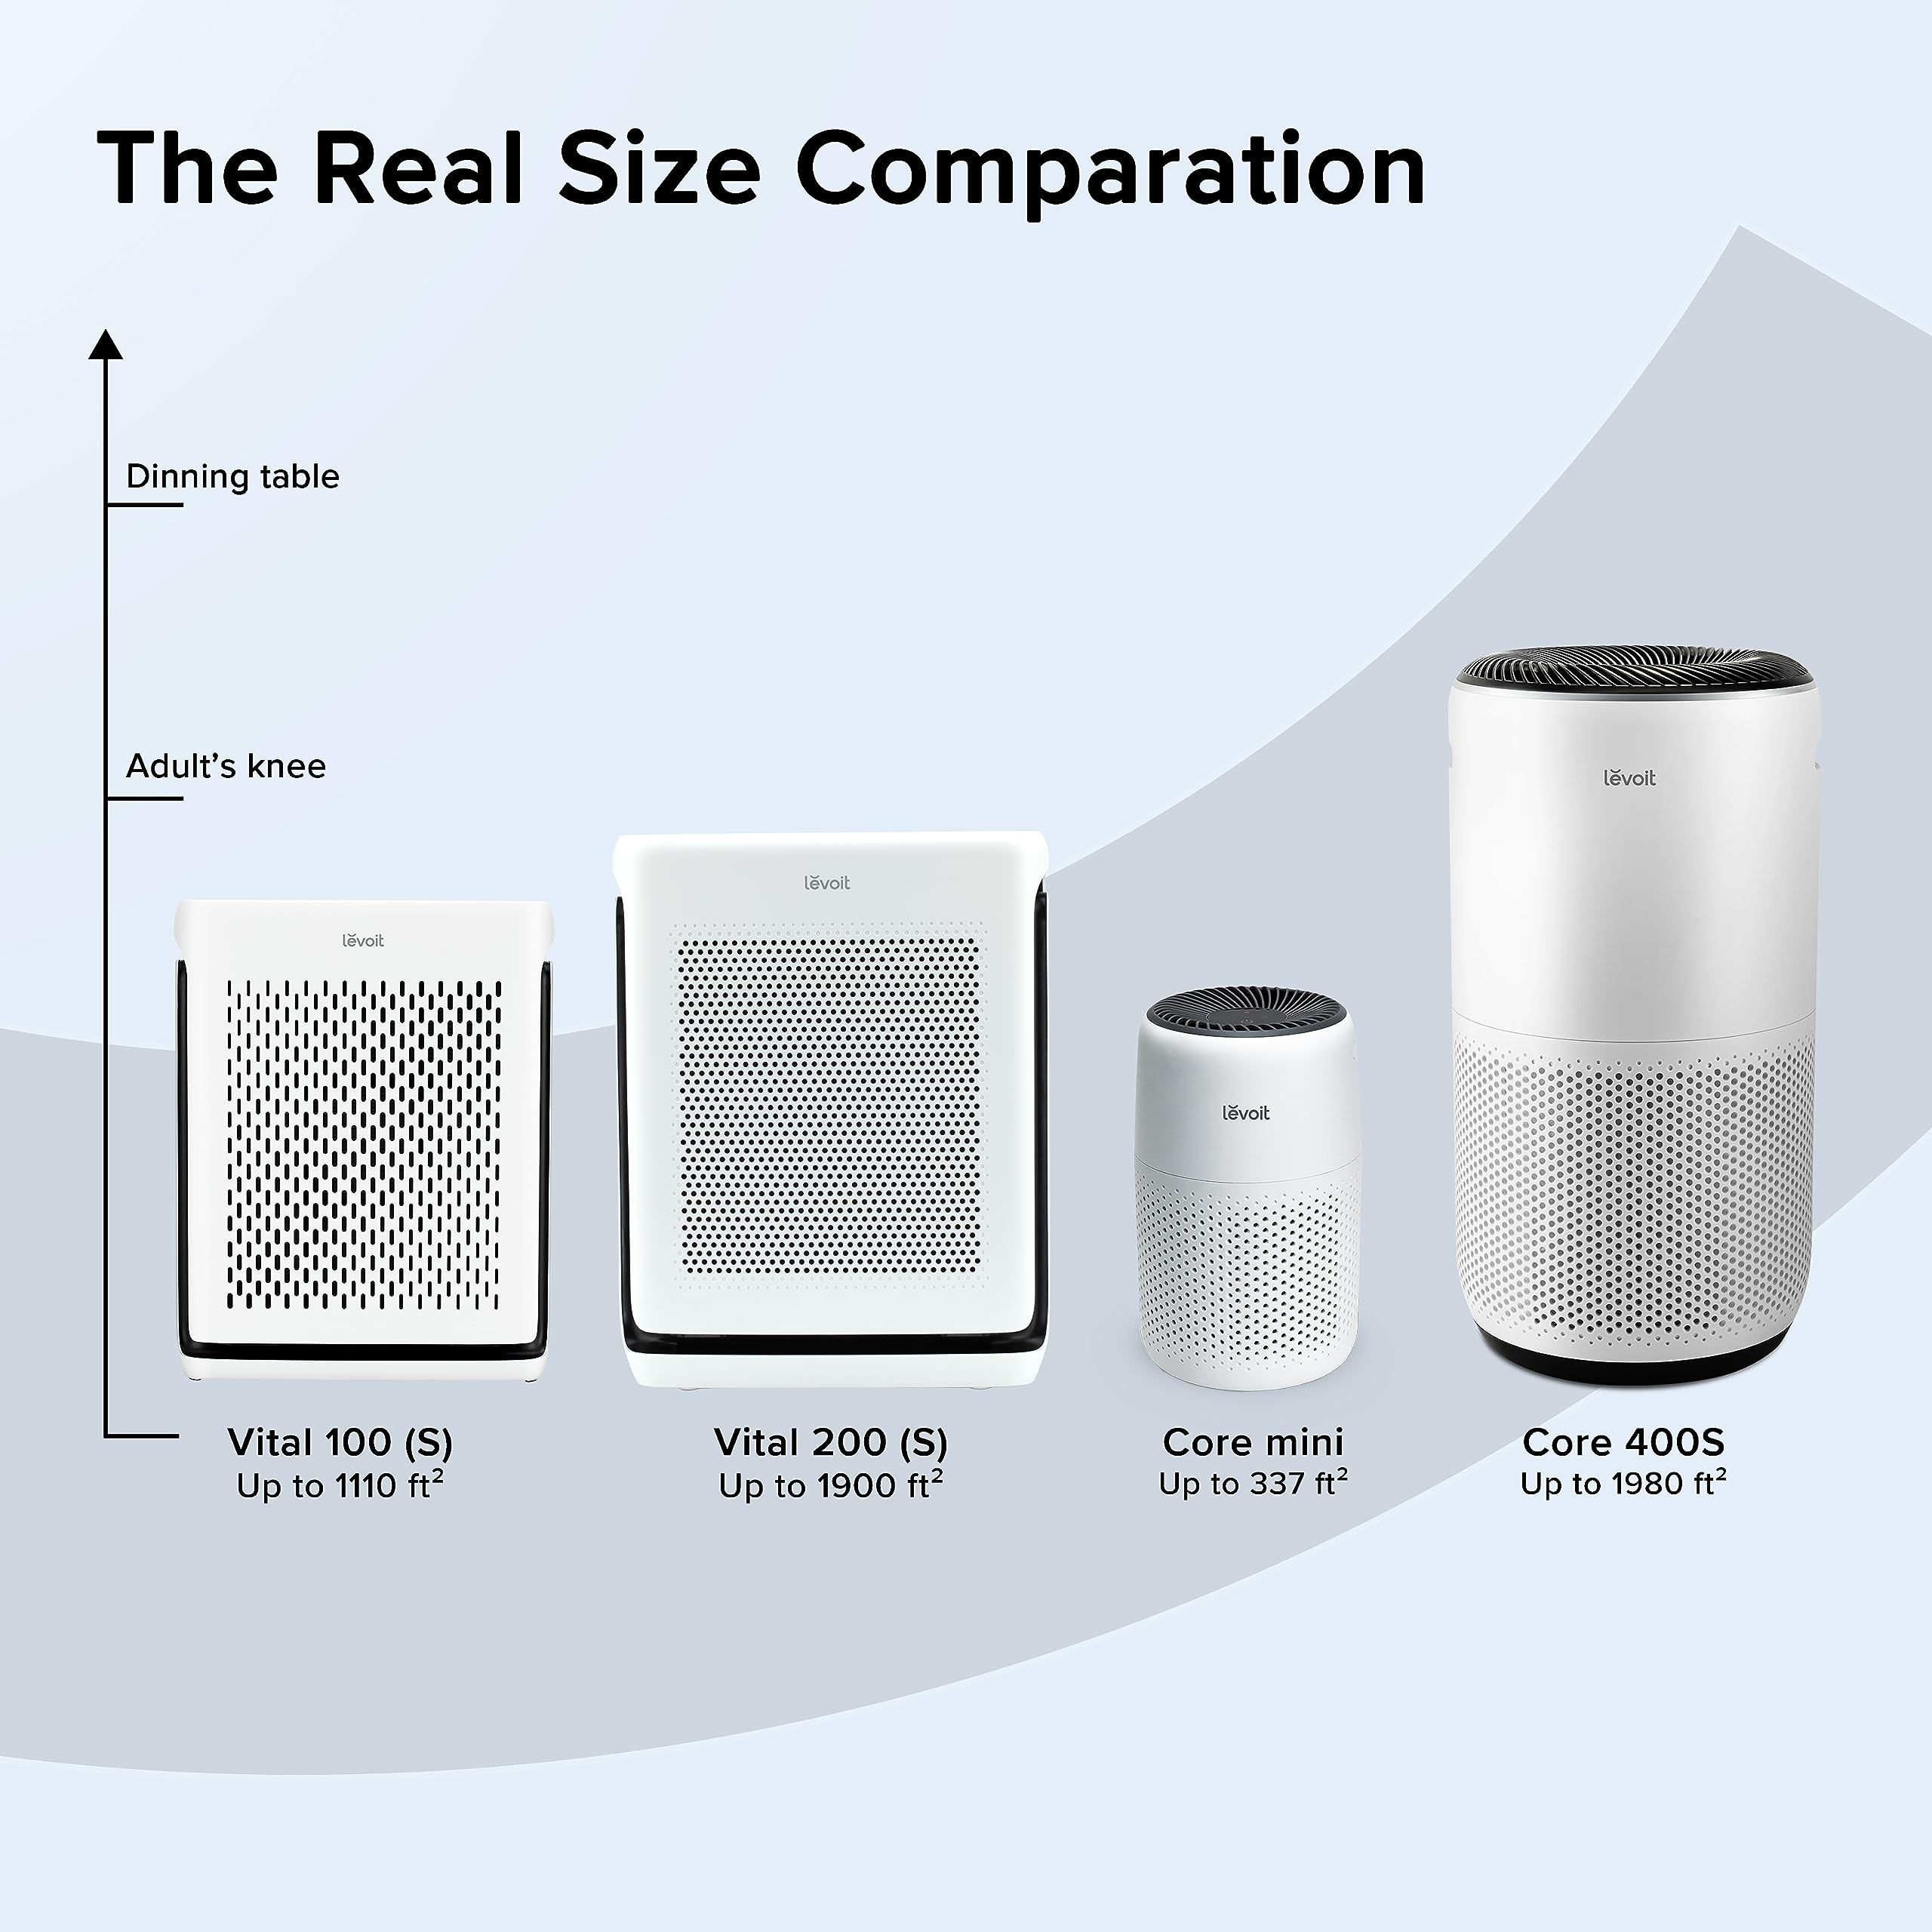 LEVOIT Air Purifiers for Home Large Room Bedroom Up to 1110 Ft² with Air Quality and Light Sensors, Smart WiFi, Washable Filters, HEPA Filter Captures Pet Hair, Allergies, Dust, Smoke, Vital 100S